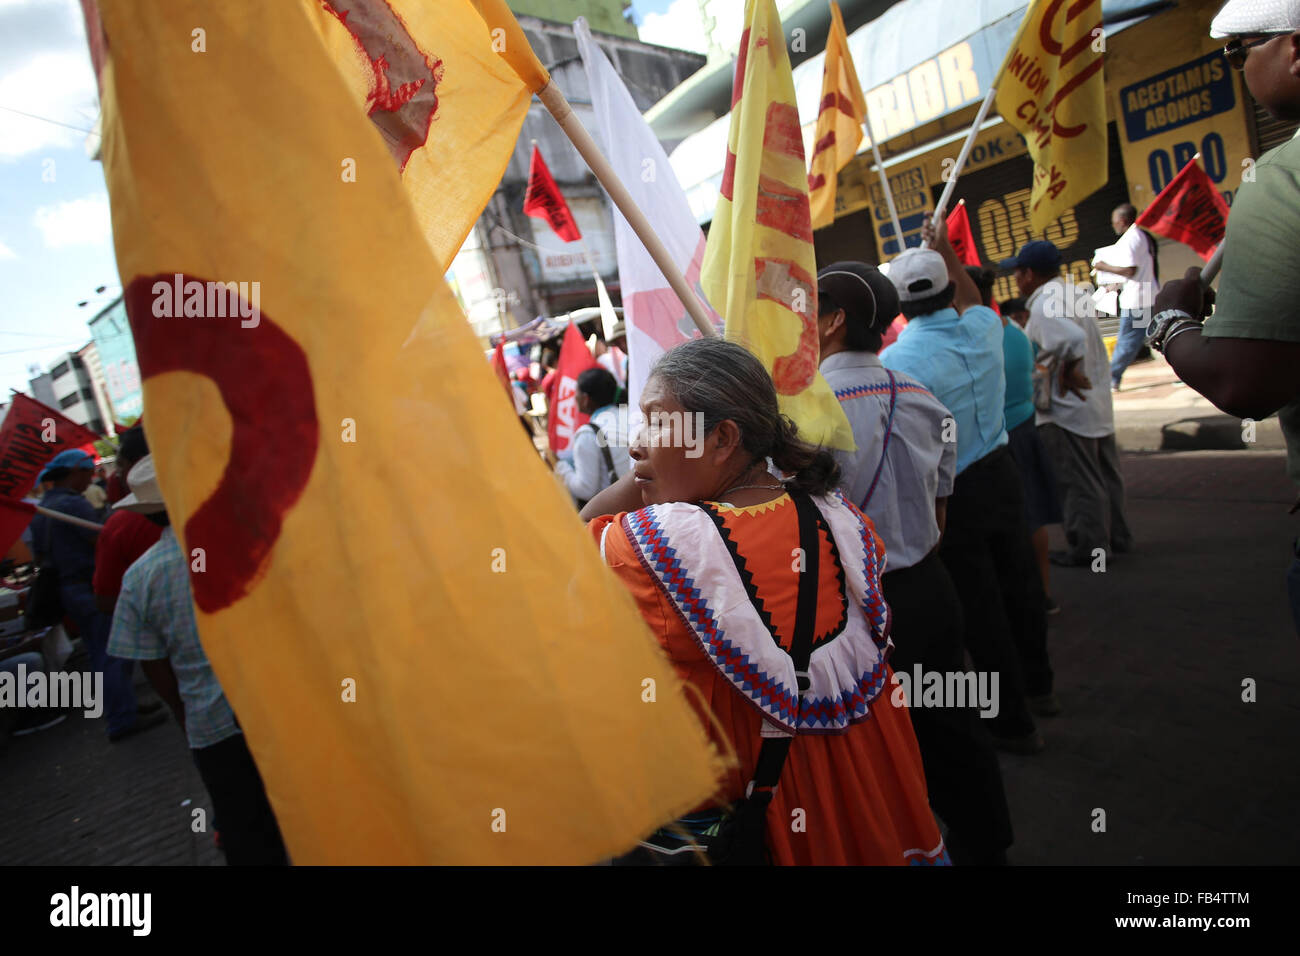 Panama City, Panama. 9th Jan, 2016. Members of different social movements take part in a march held in commemoration of the Martyrs' Day, in Panama City, capital of Panama, on Jan. 9, 2016. The Martyrs' Day was a movement occurred in Panama on Jan. 9, 1964, when troops of the U.S. Army clashed with high school students who demanded the right to raise the national flag in the area known as Canal Zone, a strip of land around the Panama Canal, which was ceded to the United States of America in perpetuity as a result of the Hay-Bunau-Varilla Treaty. © Mauricio Valenzuela/Xinhua/Alamy Live News Stock Photo